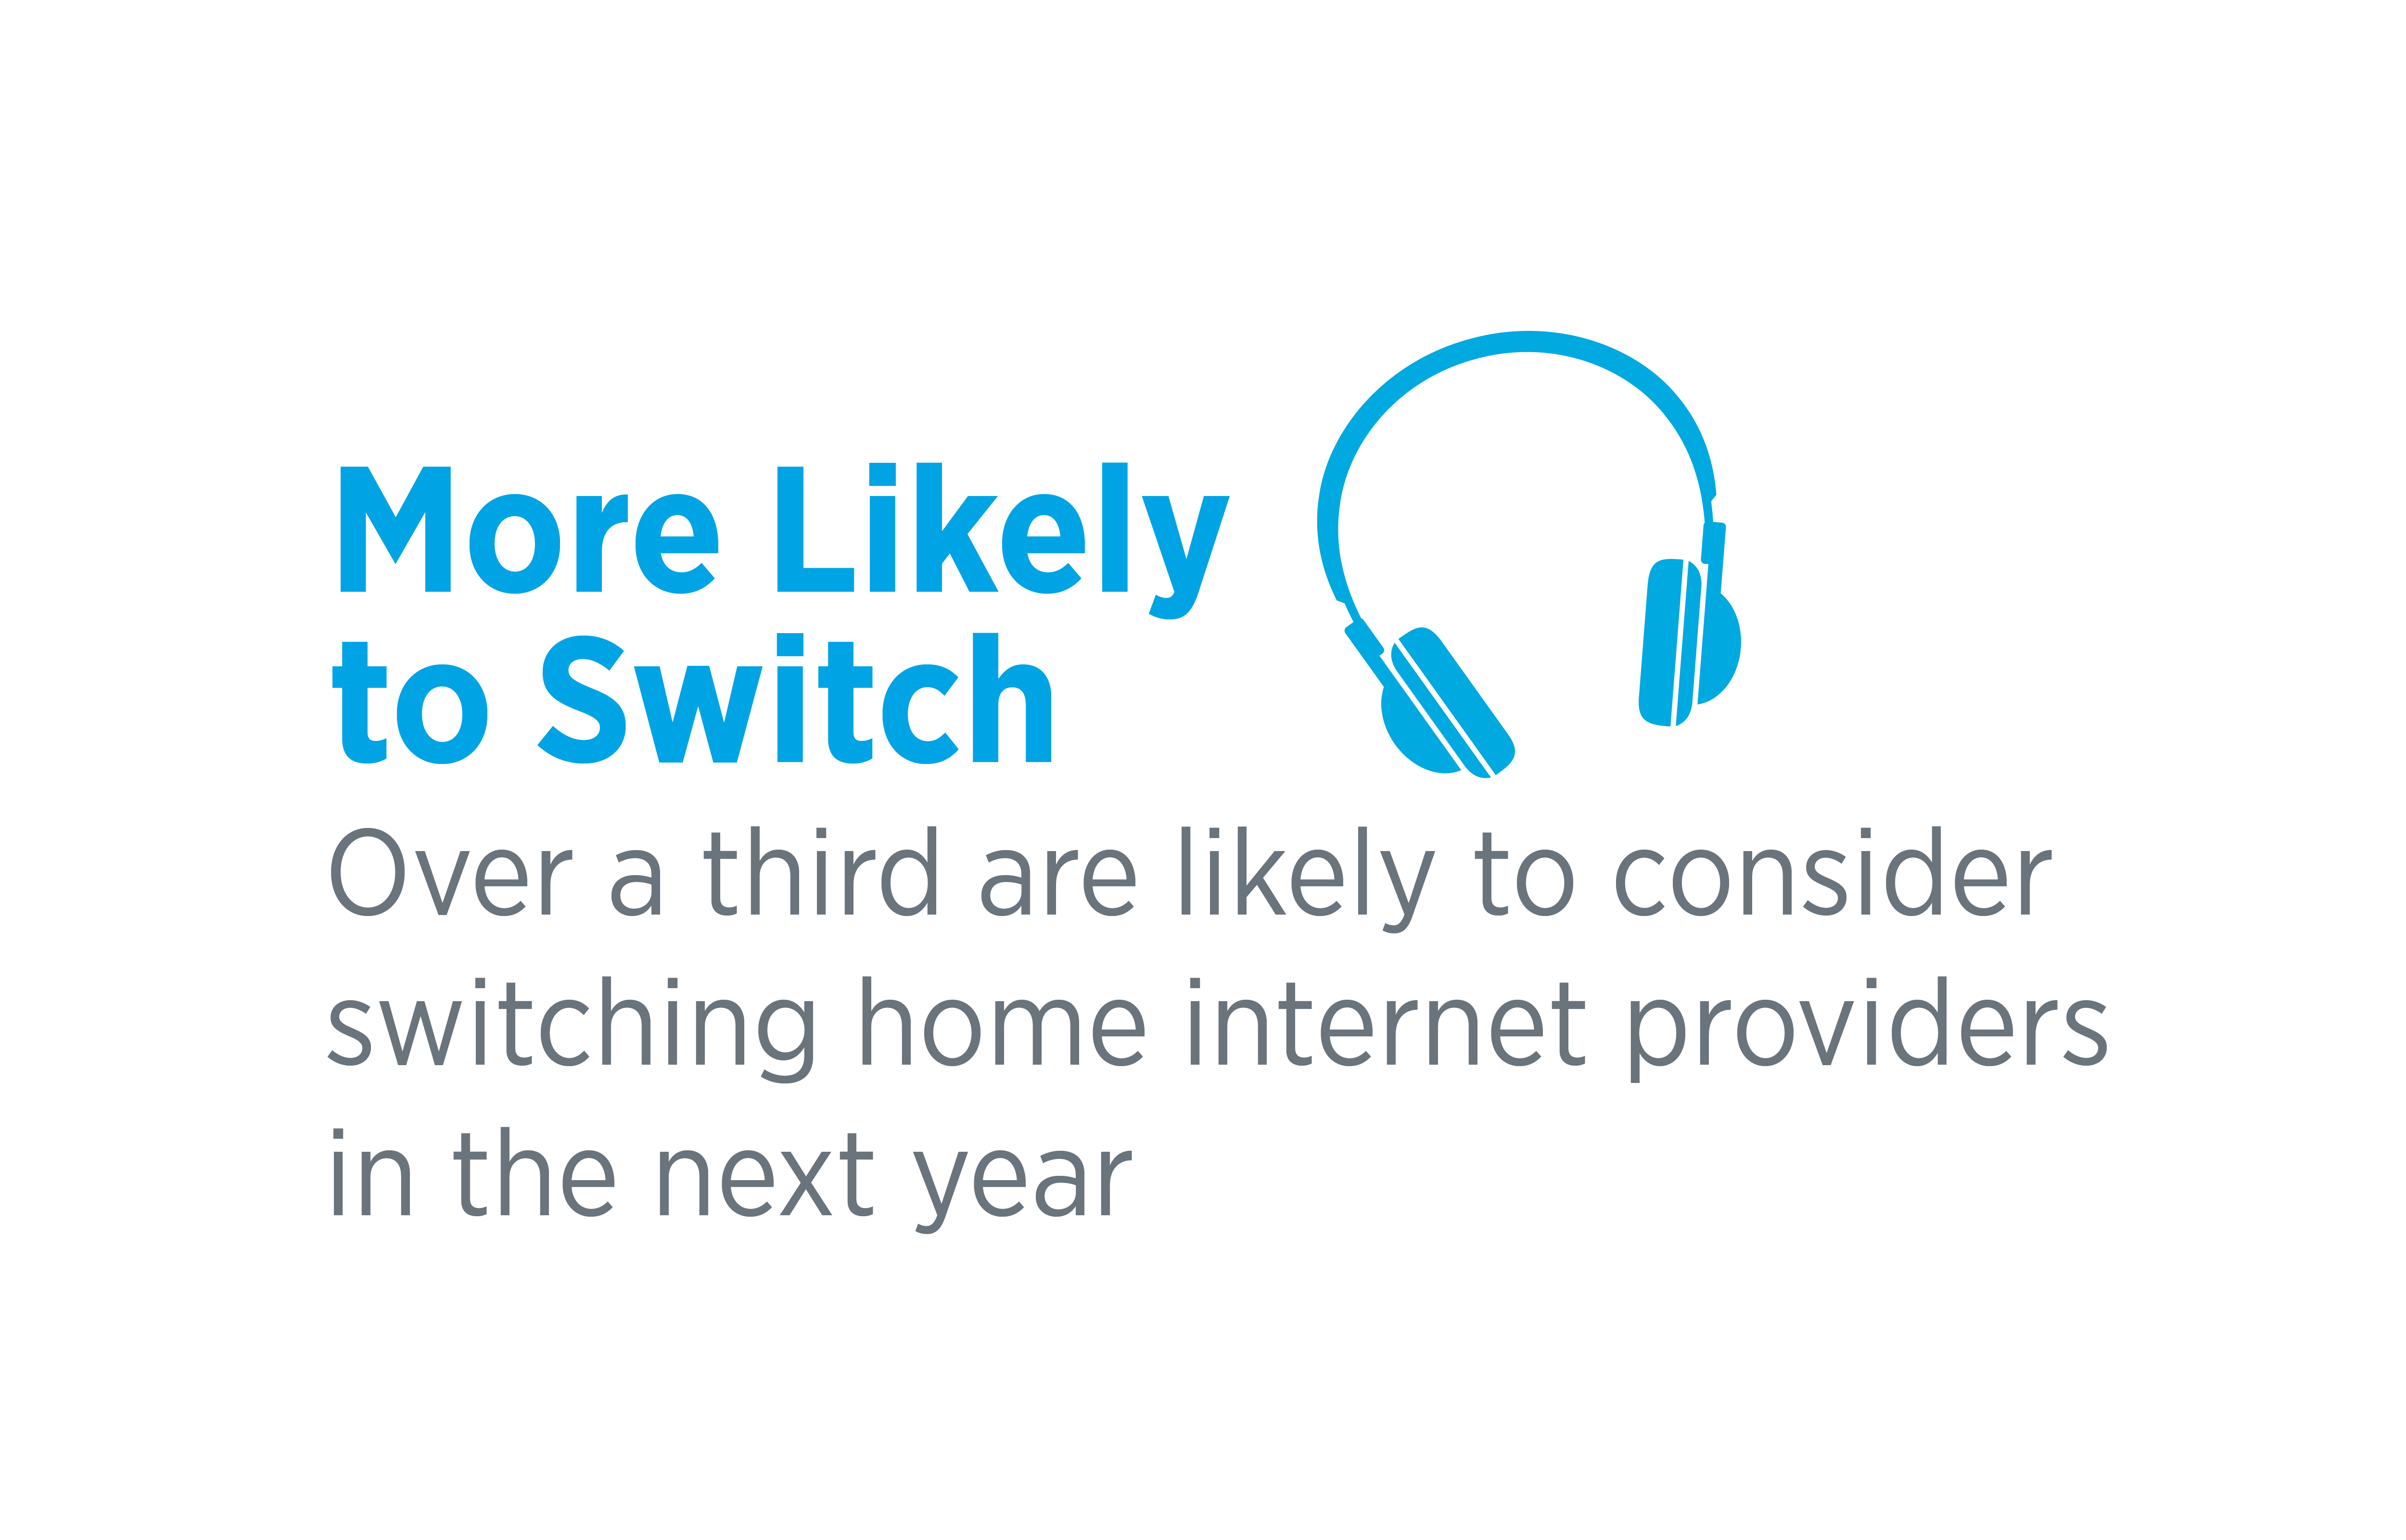 More Likely to Switch